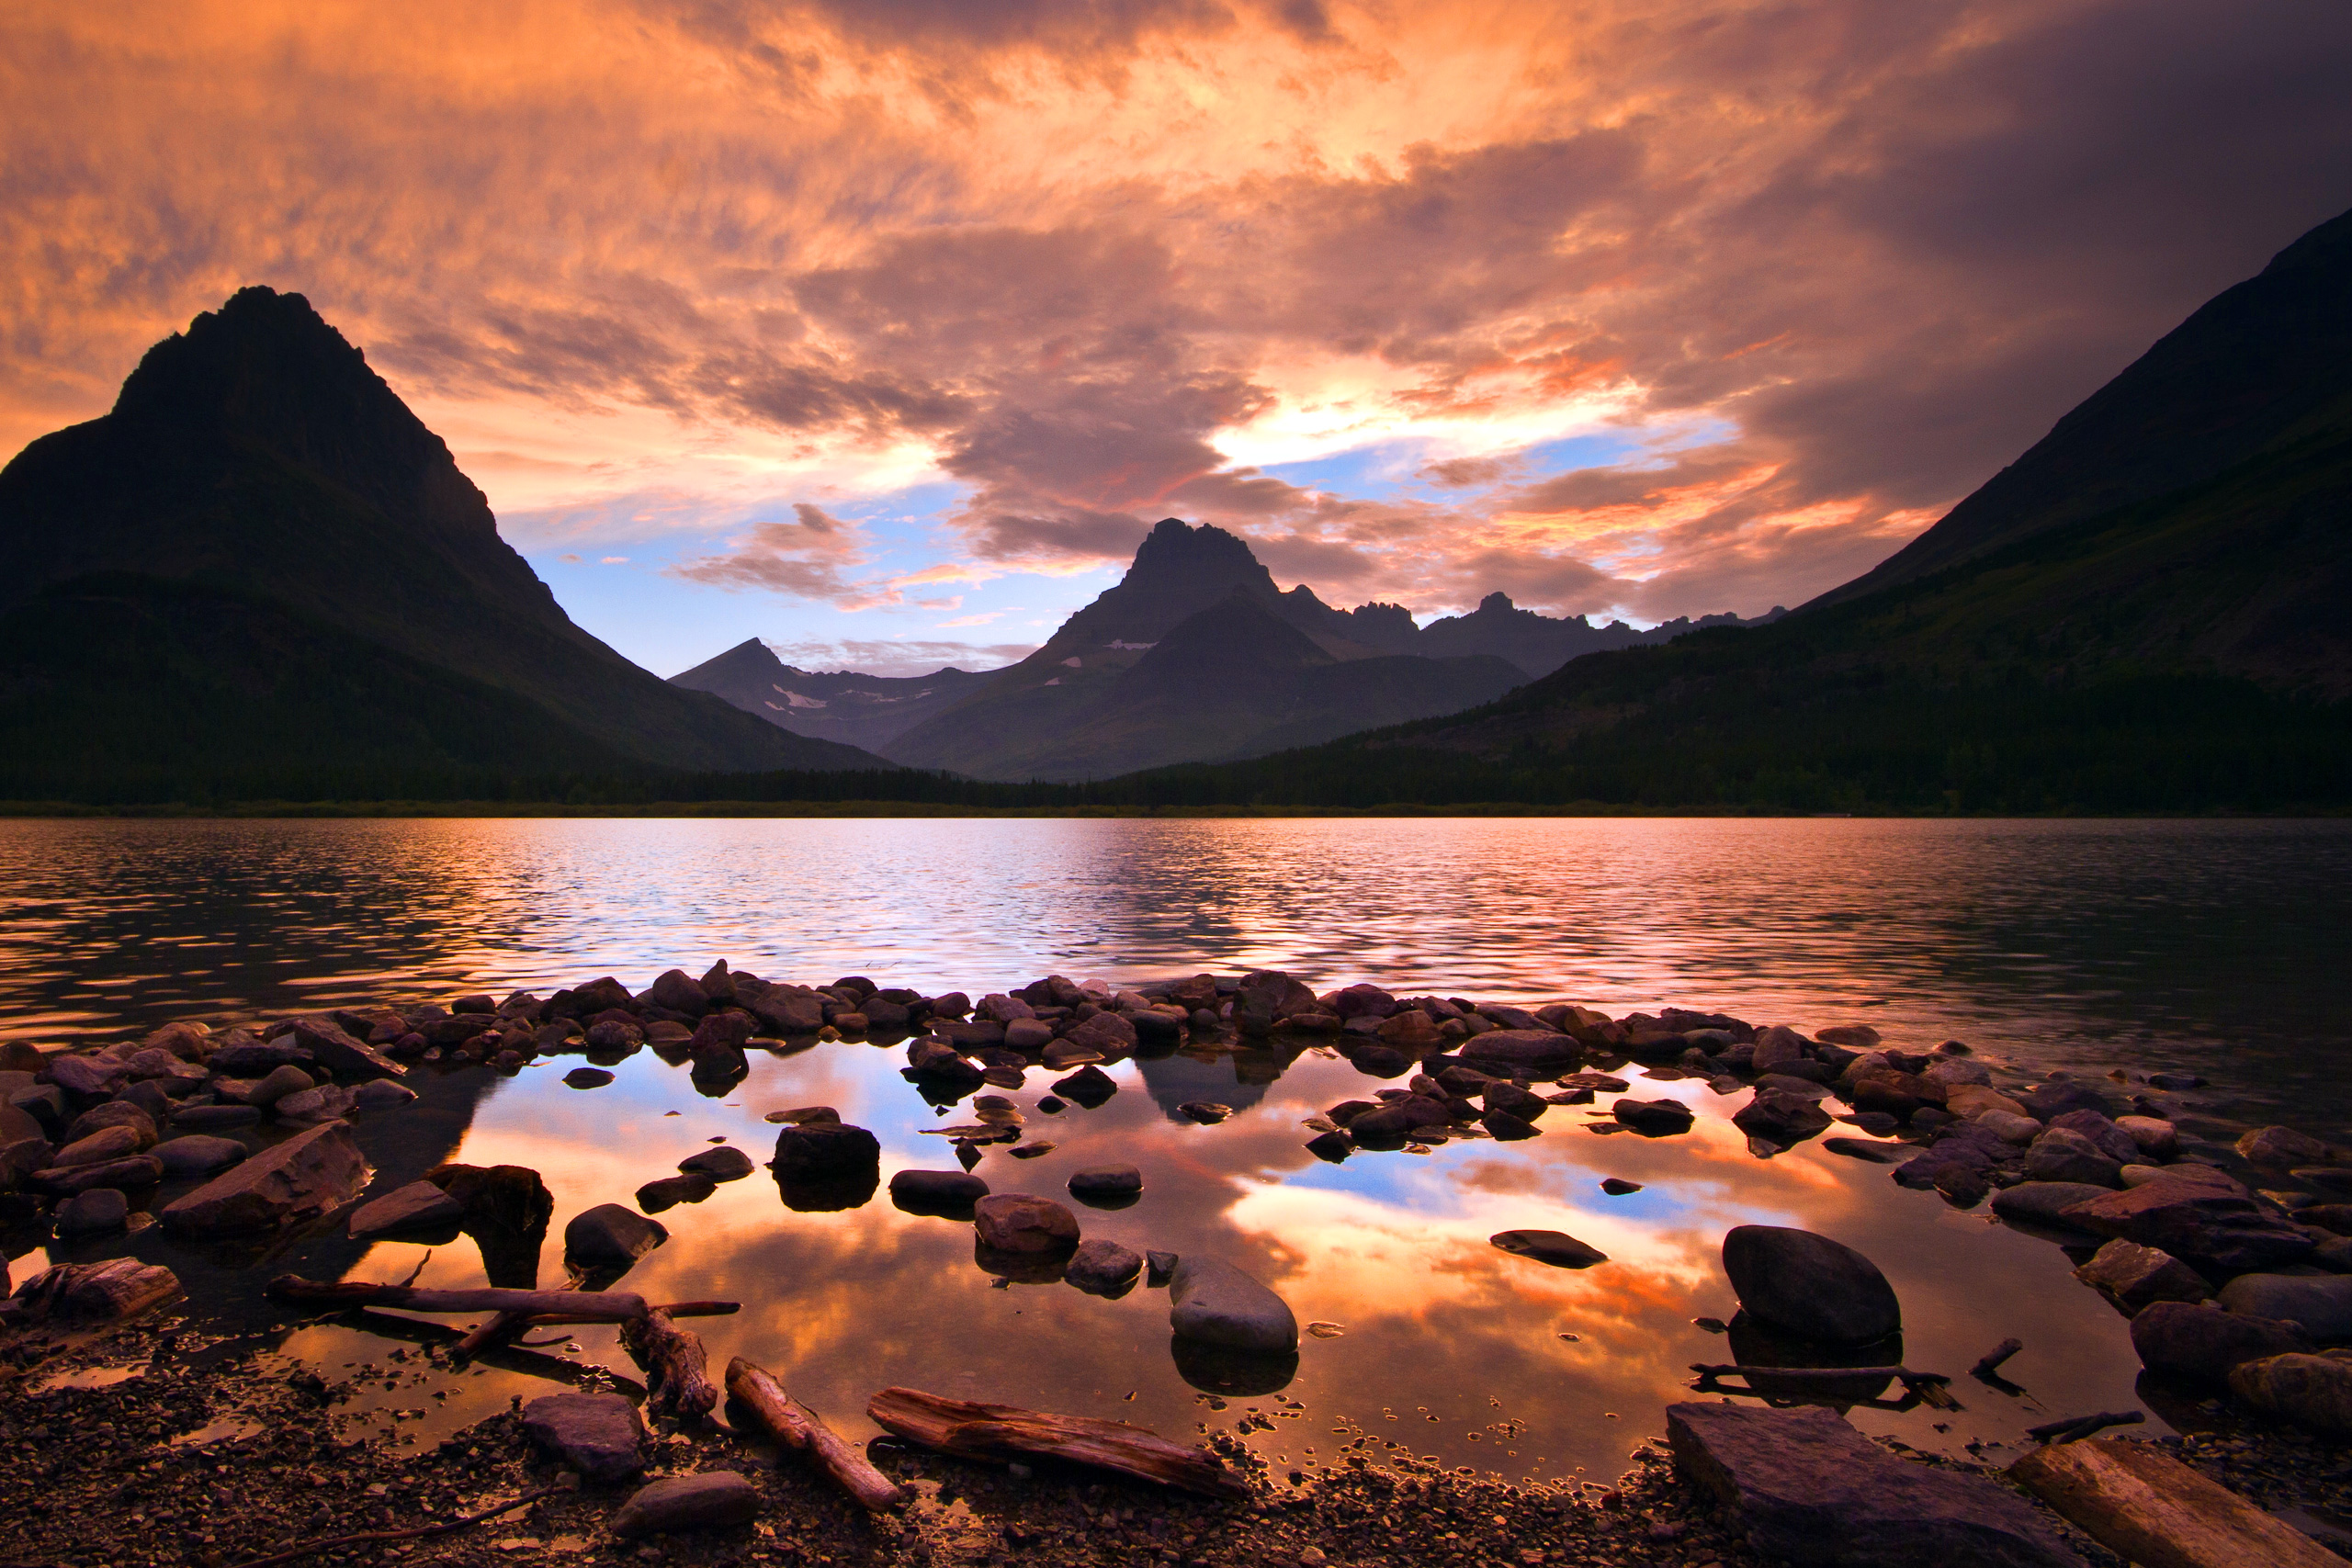 Sunset on Swiftcurrent Lake in Glacier National Park, Montana